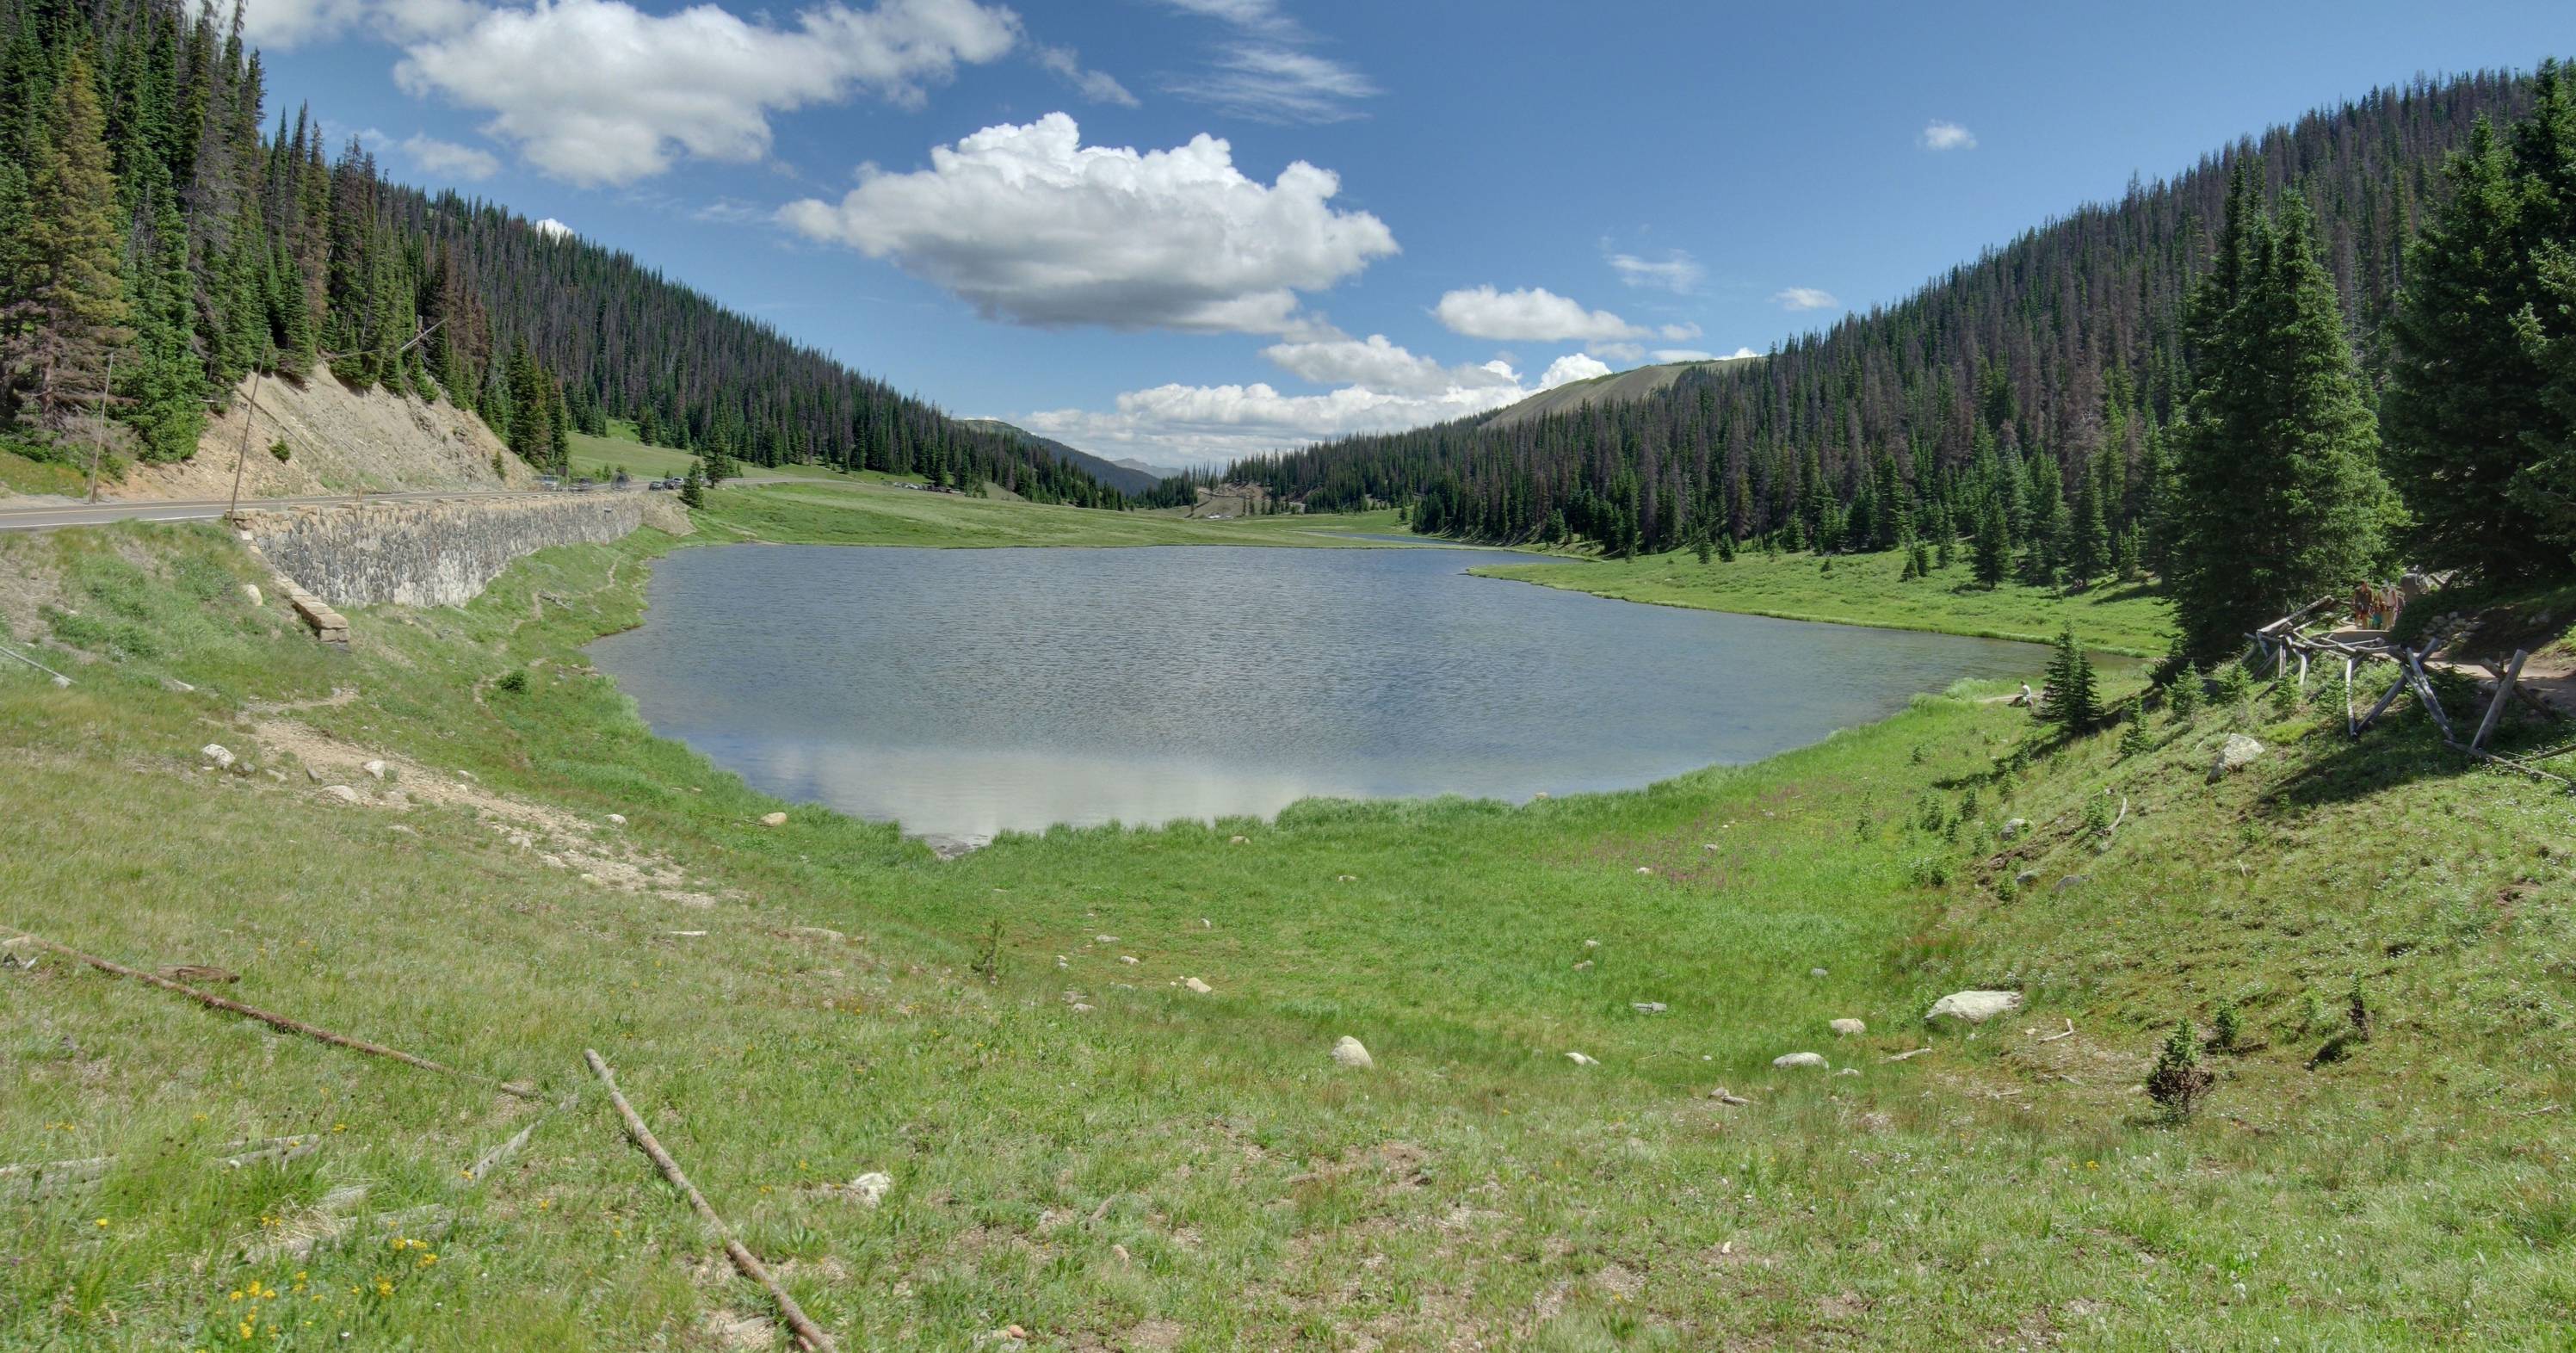 Image: The Poudre Lake as seen from the Ute Trailhead